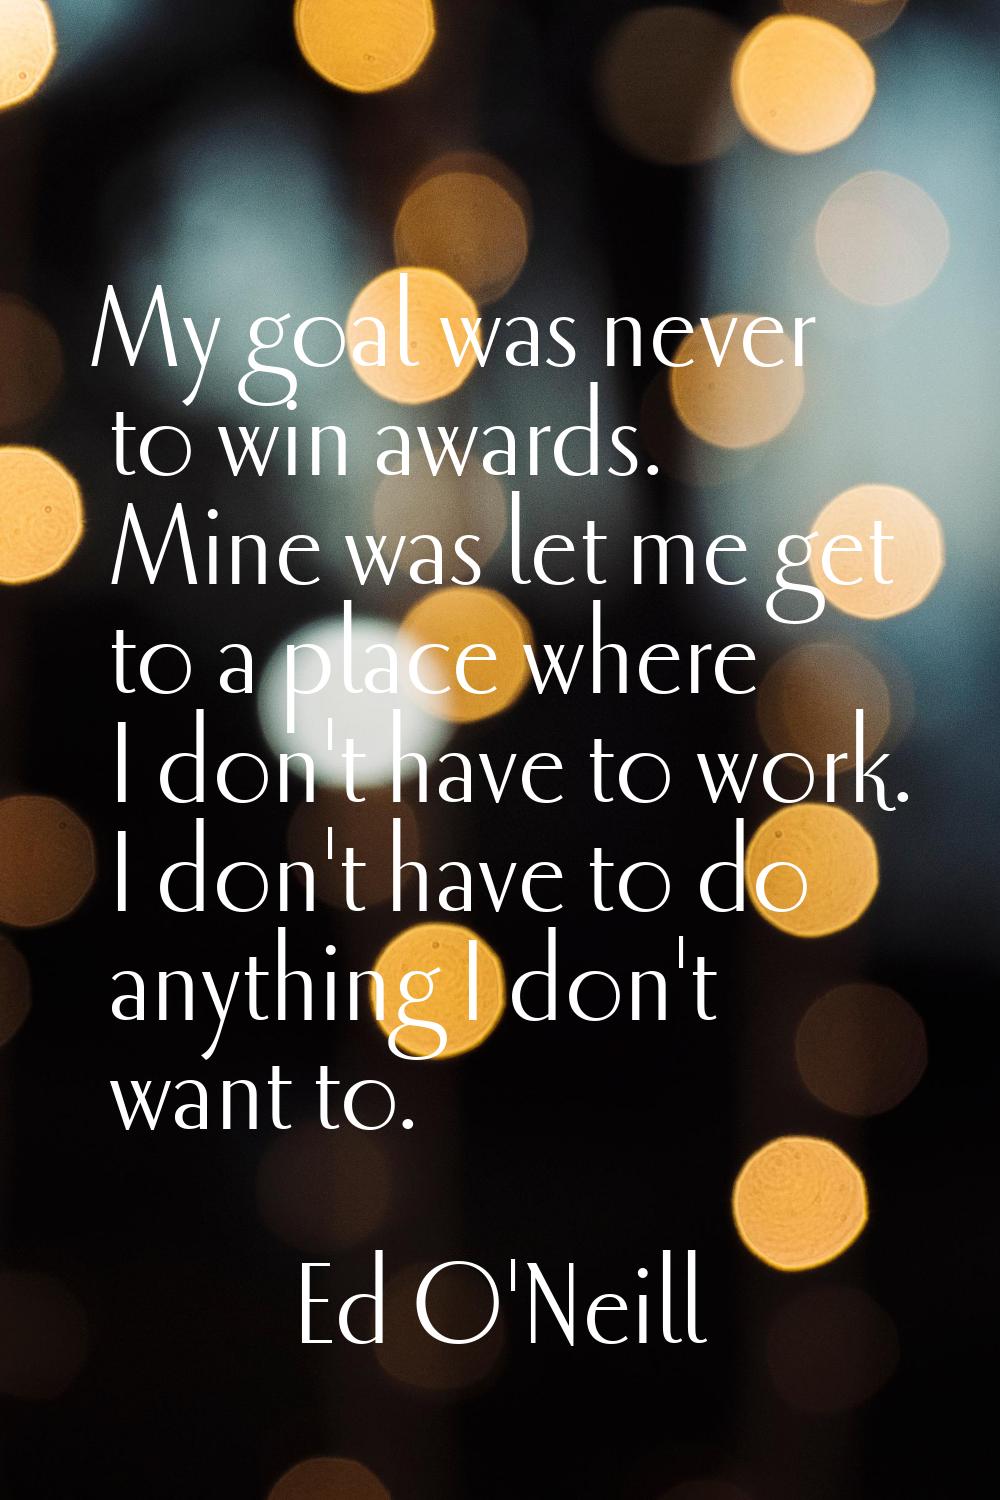 My goal was never to win awards. Mine was let me get to a place where I don't have to work. I don't